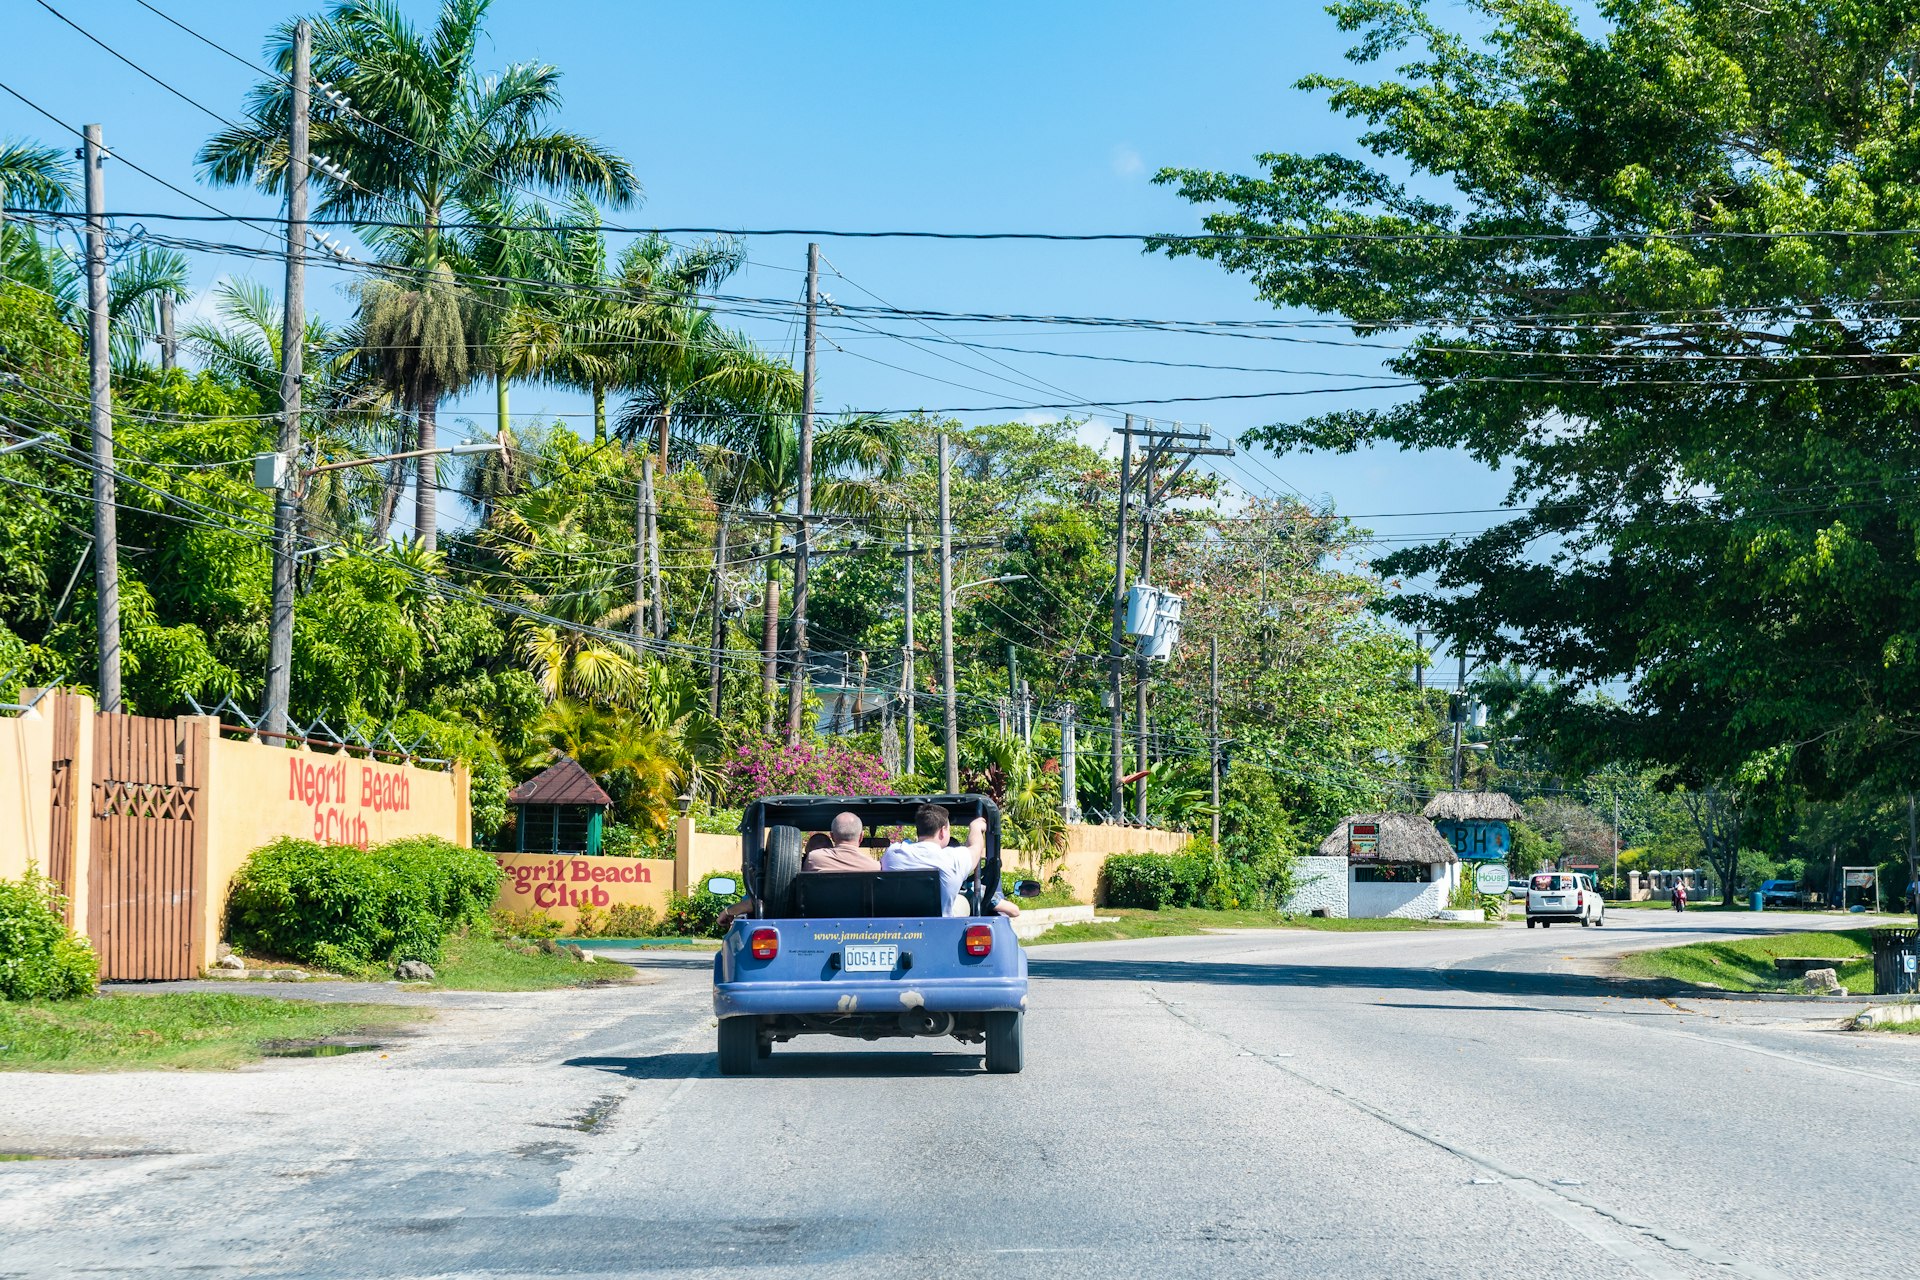 An open-top car drives along a palm-tree lined road